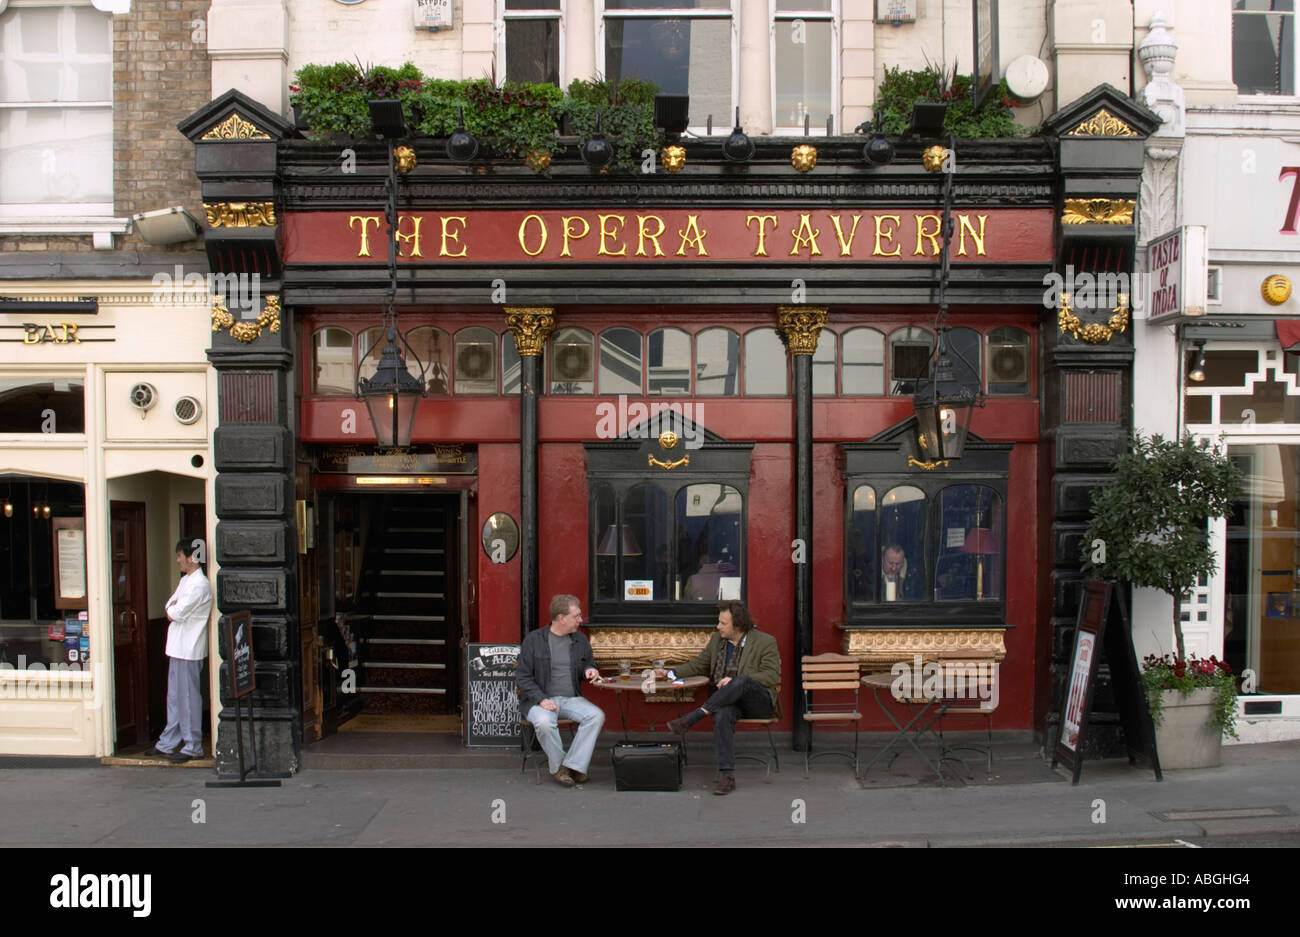 Opera Tavern Covent Garden London England Built in 1879 designed by pub architect George Treacher (since revamped) Stock Photo